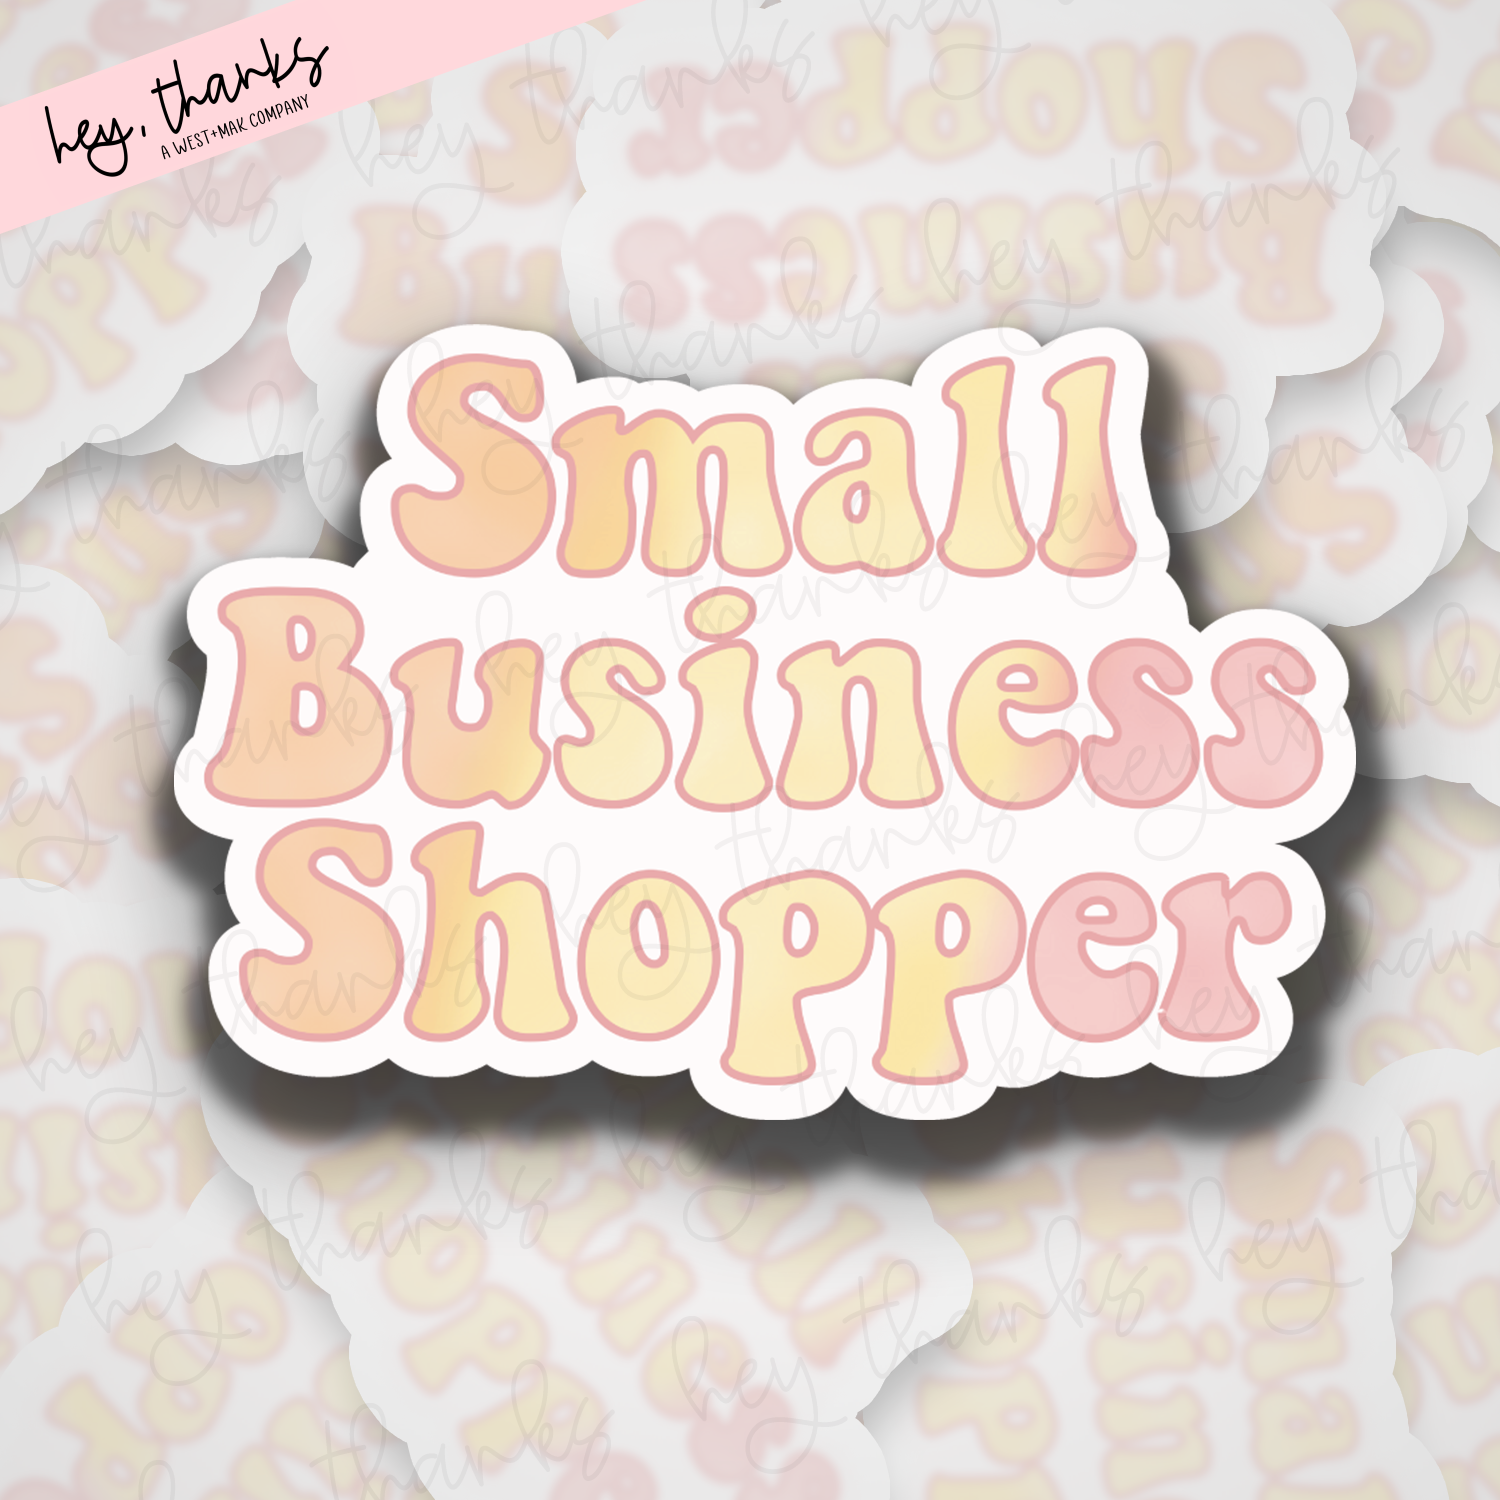 Small Business Shopper || Packaging Stickers